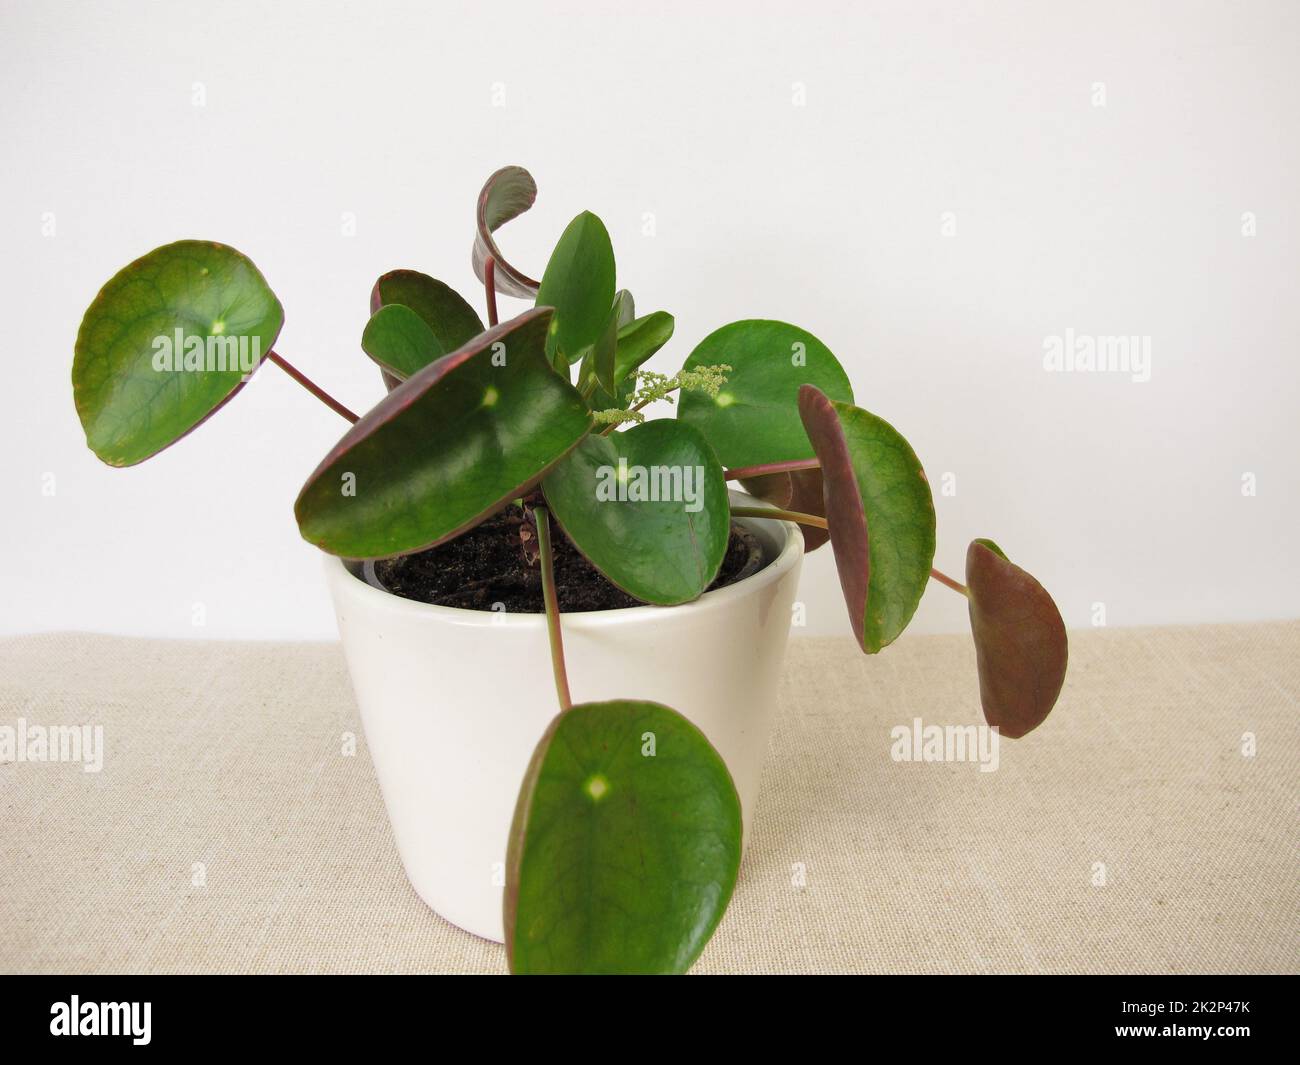 Flowering Pancake plant with flower, Pilea peperomioides Stock Photo